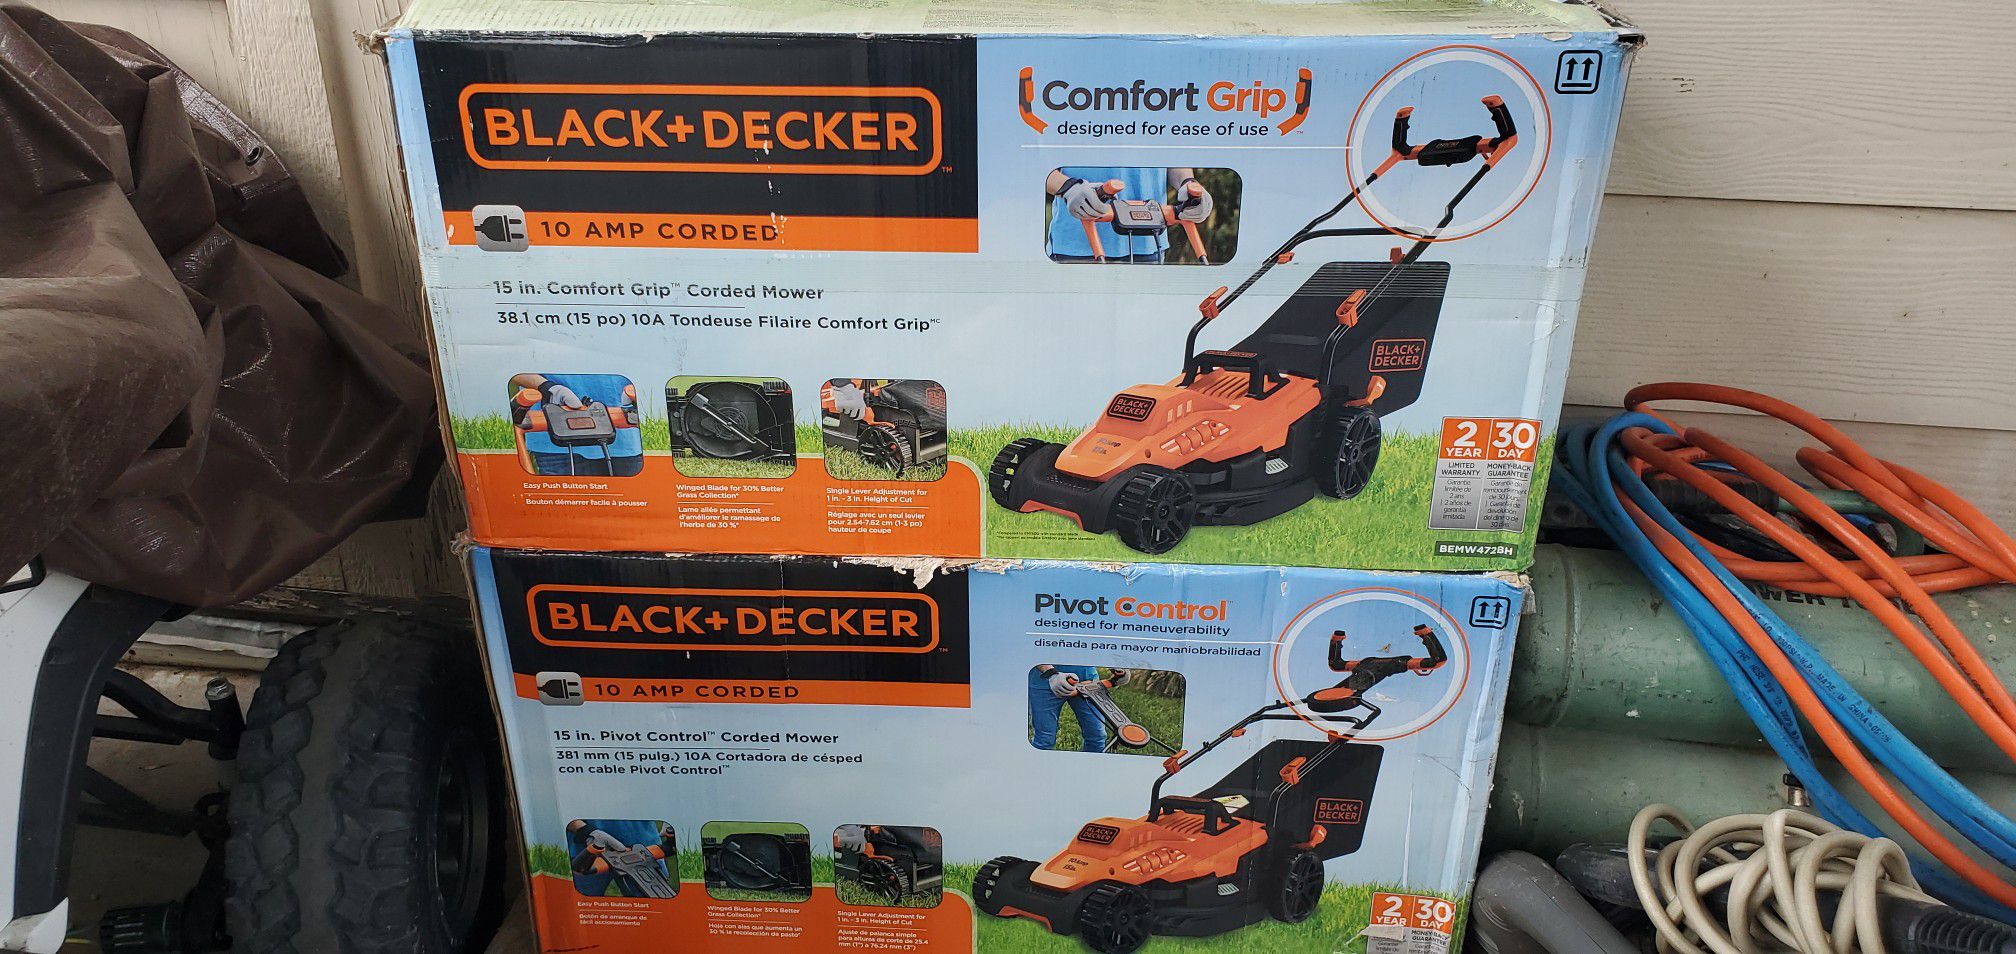 Electric lawn mowers